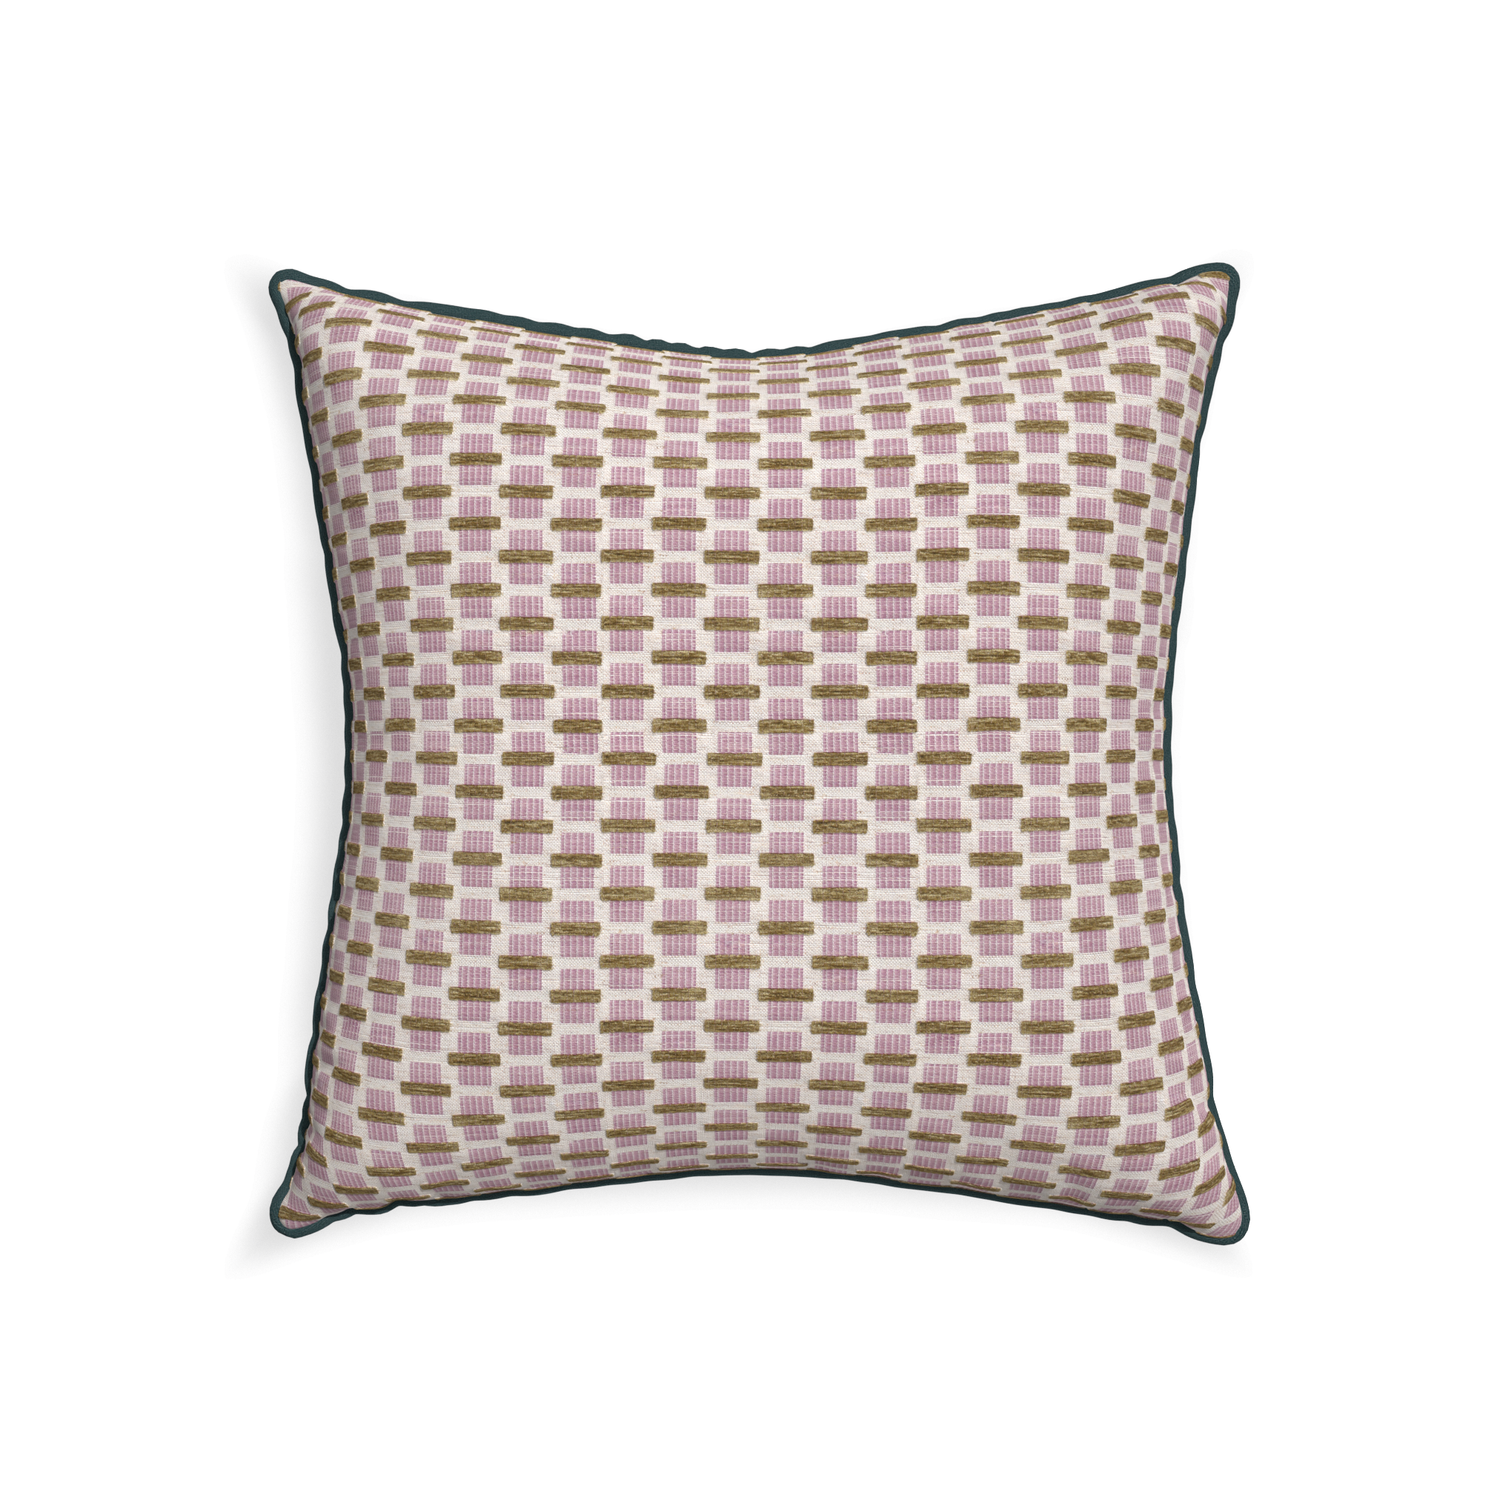 22-square willow orchid custom pink geometric chenillepillow with p piping on white background